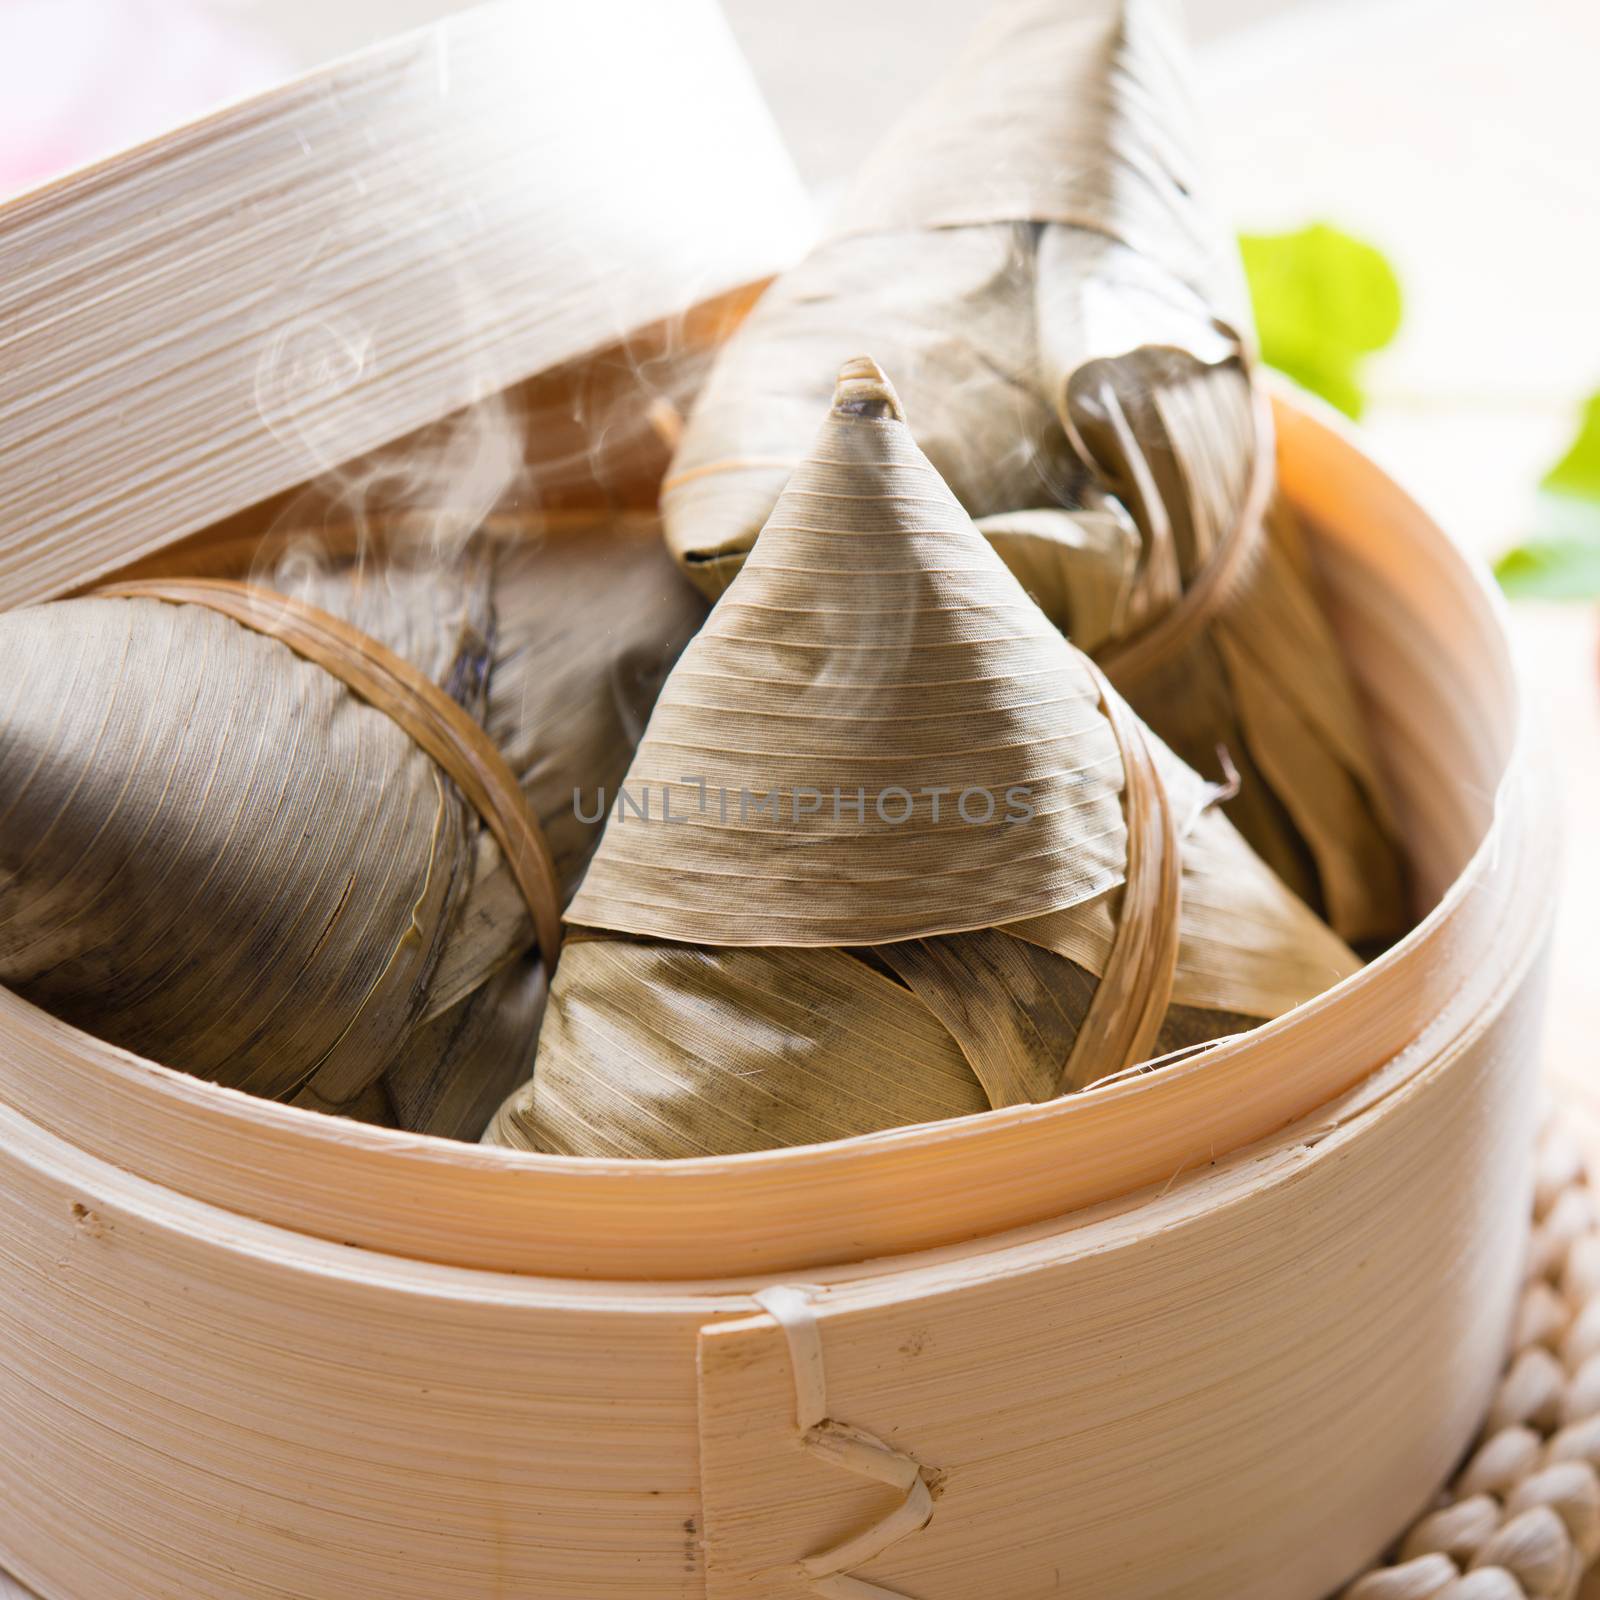 Hot rice dumpling or zongzi. Traditional steamed sticky glutinous rice dumplings. Chinese food dim sum. Asian cuisine.